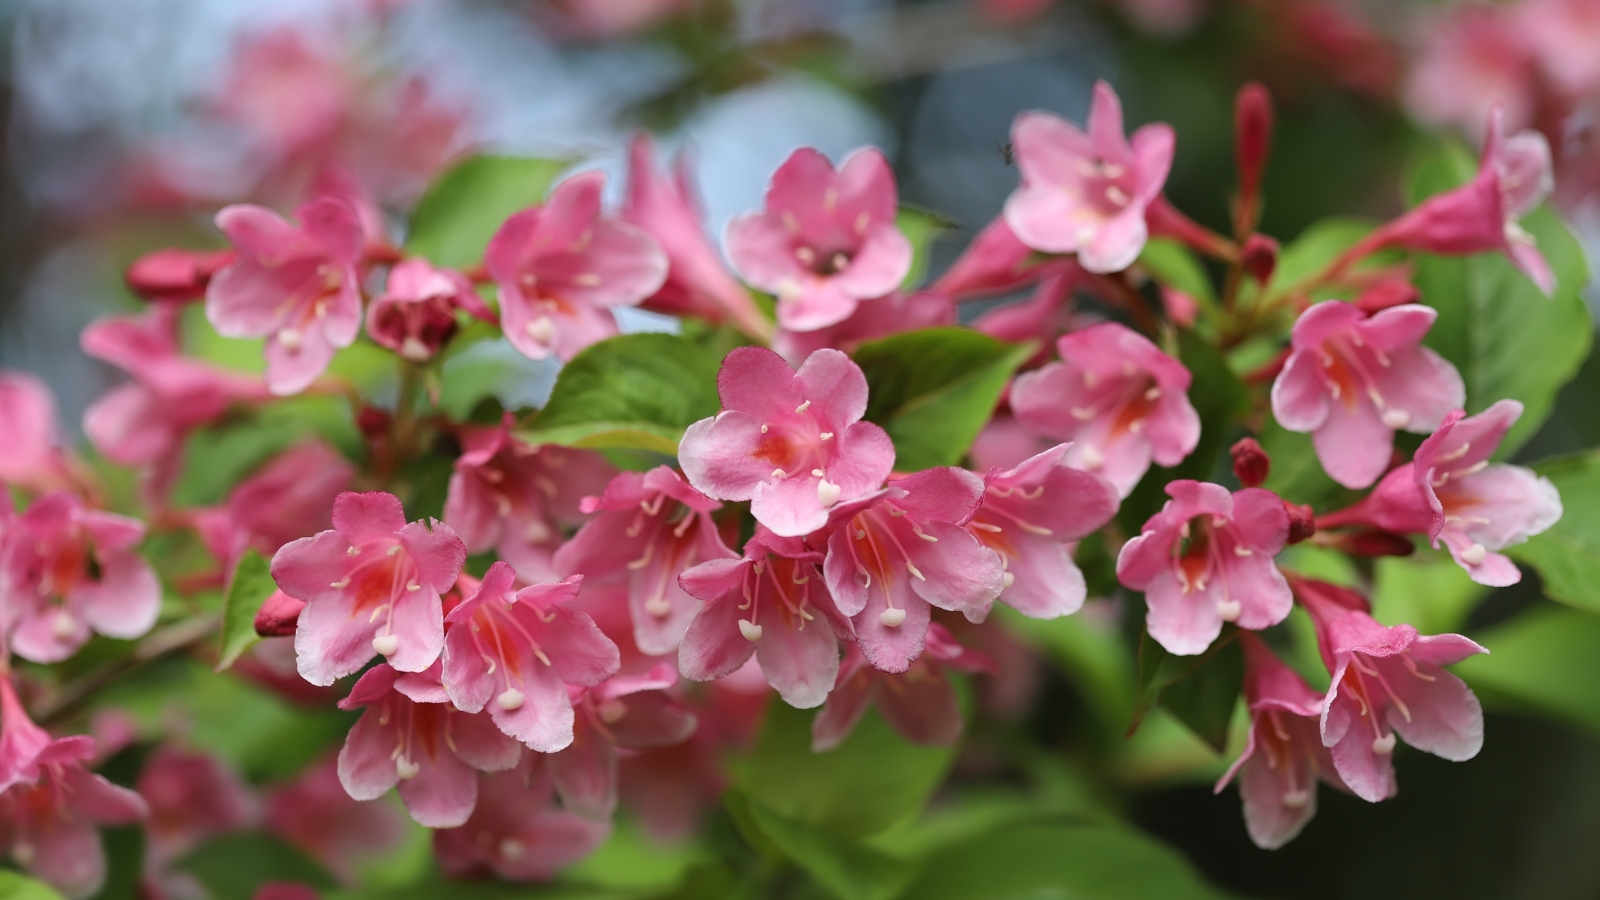 Pink 'Crimson Kisses' weigela blooms stand out against green foliage in a close-up, showcasing nature's delicate balance of color and texture in a garden setting.